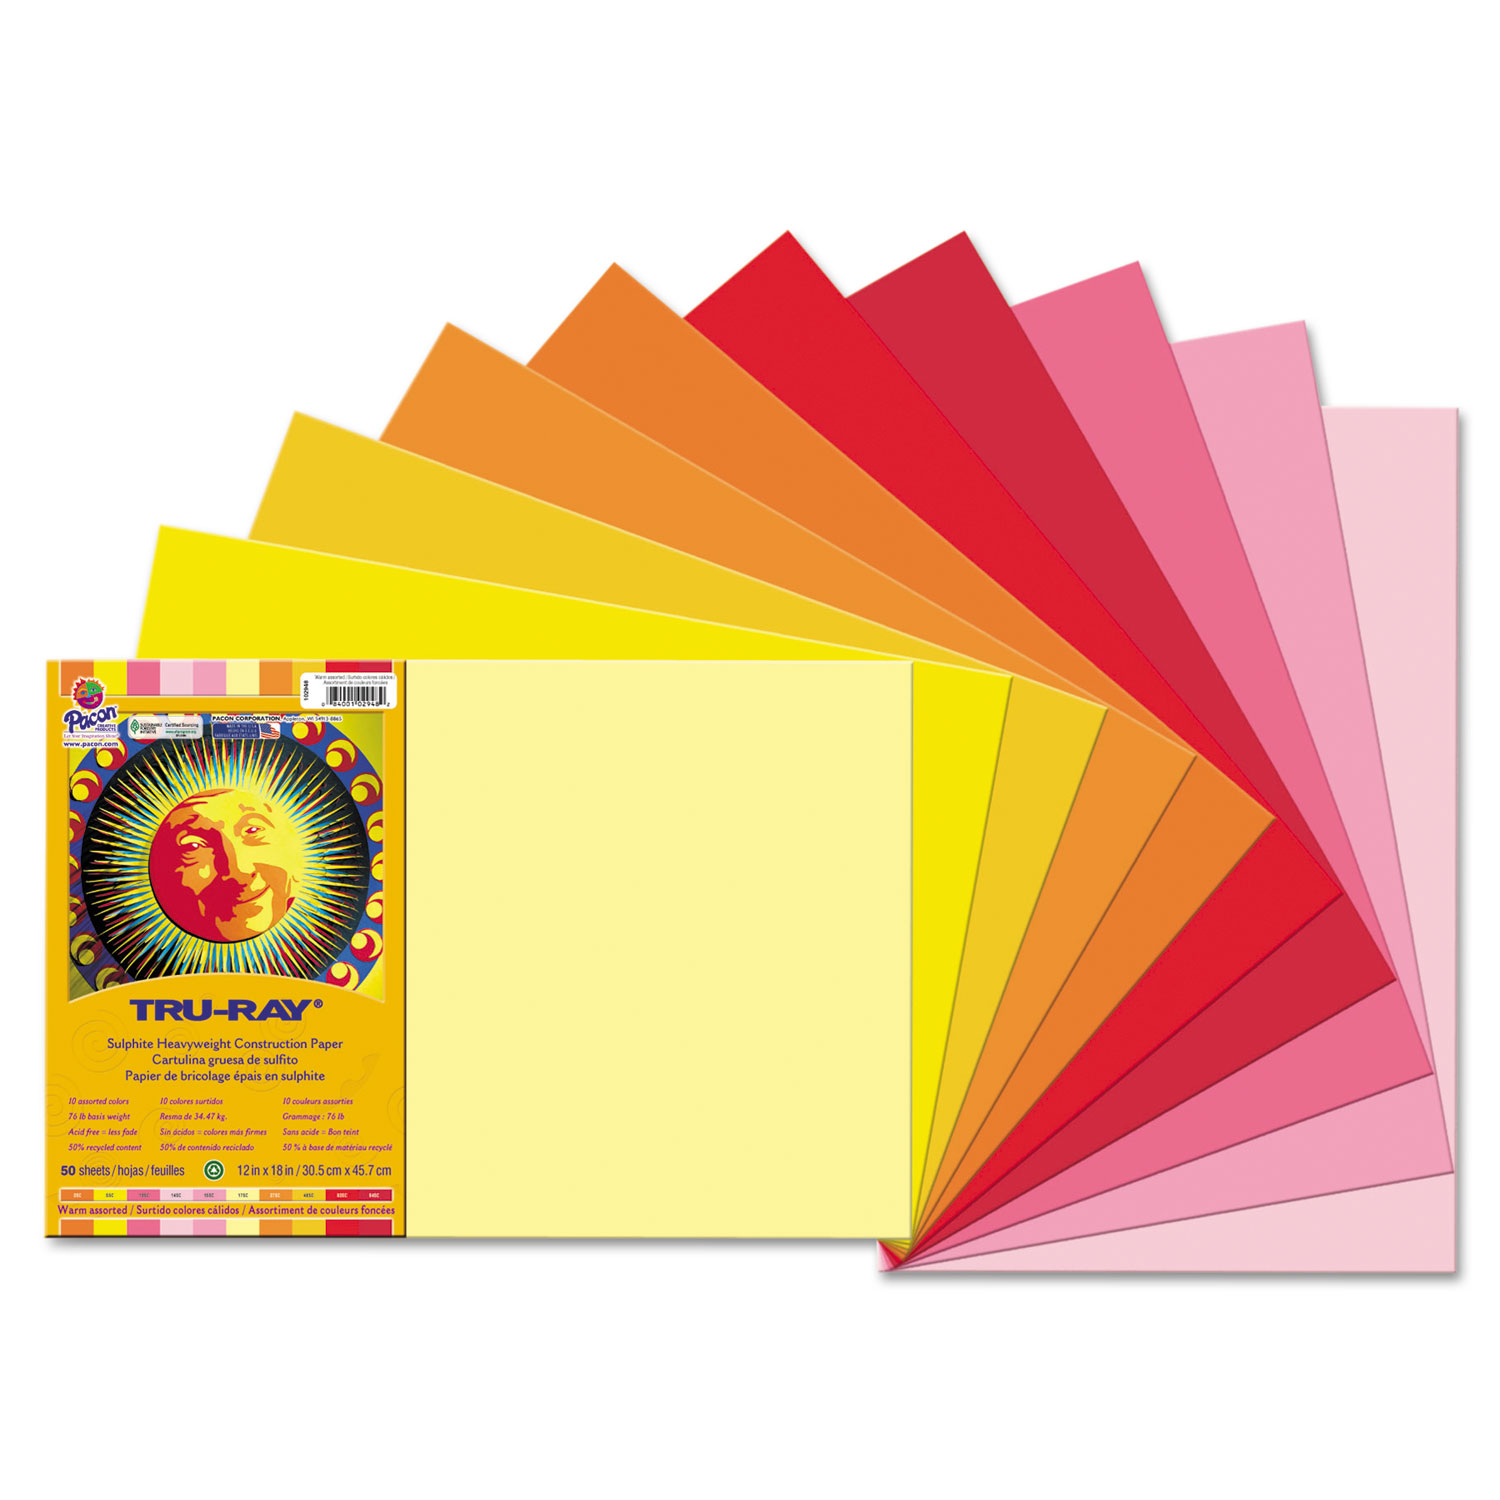  Pacon 102943 Tru-Ray Construction Paper, 76lb, 12 x 18, Assorted Cool/Warm Colors, 25/Pack (PAC102948) 